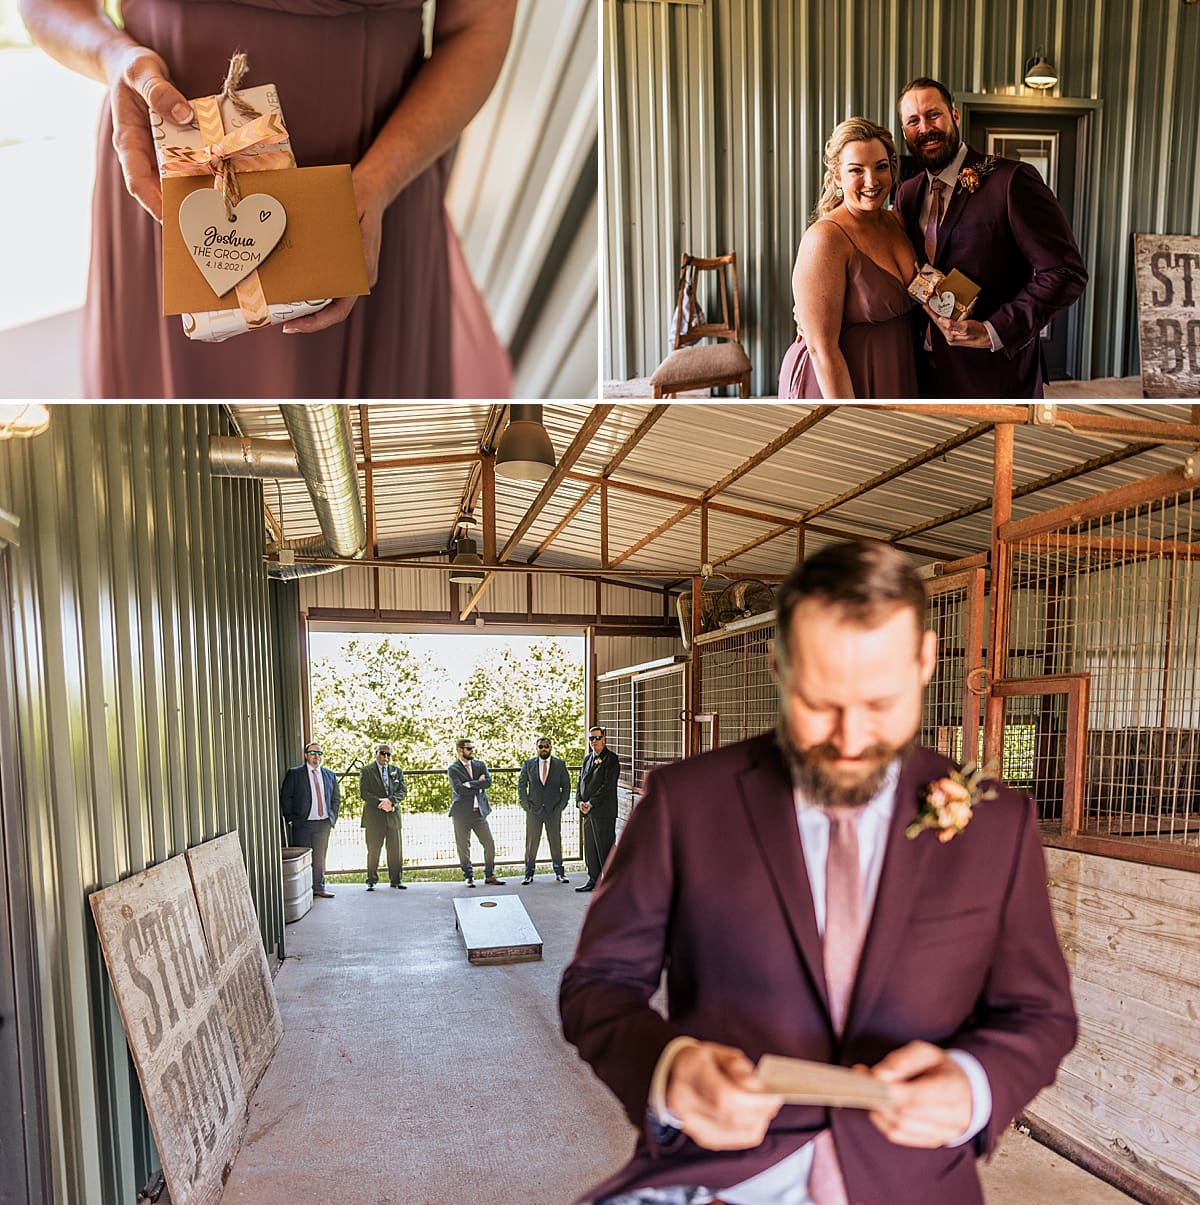 groom getting gift from bride on wedding day